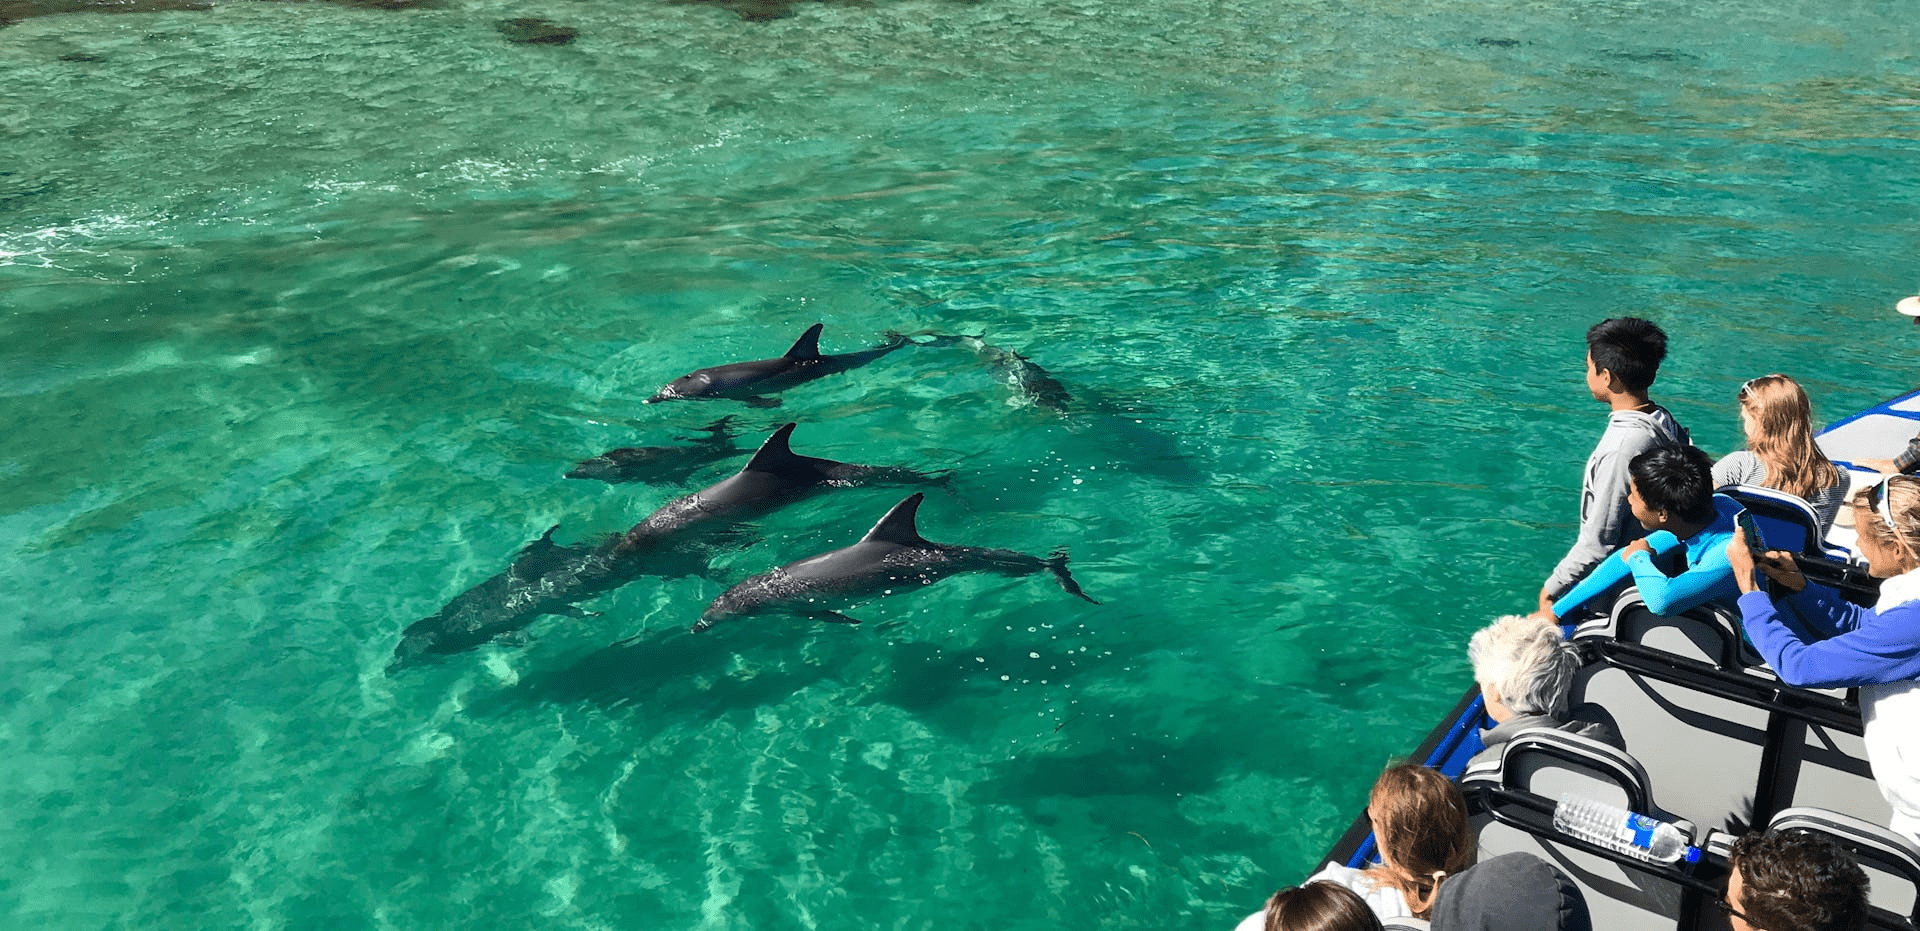 Swimming With Dolphins At Kangaroo Island